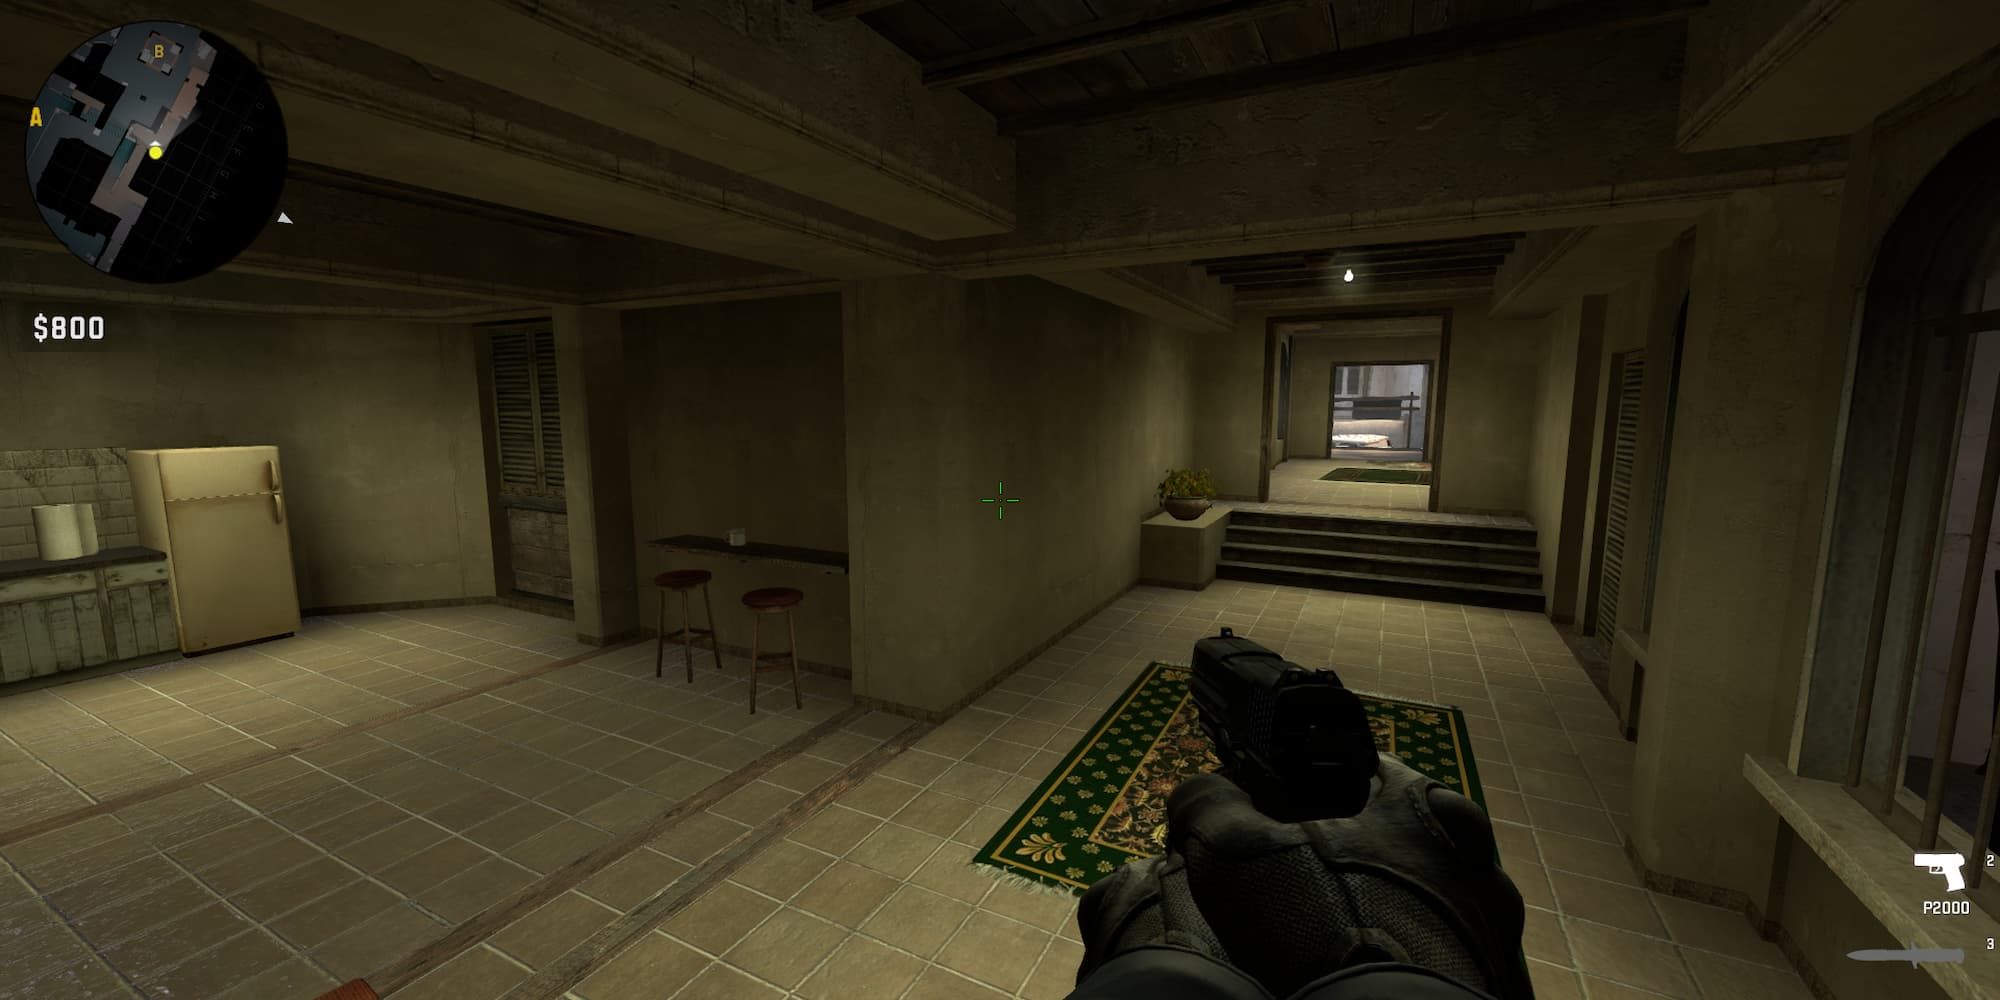 In the corner of Apartments on Mirage, a player camps on top of a table.